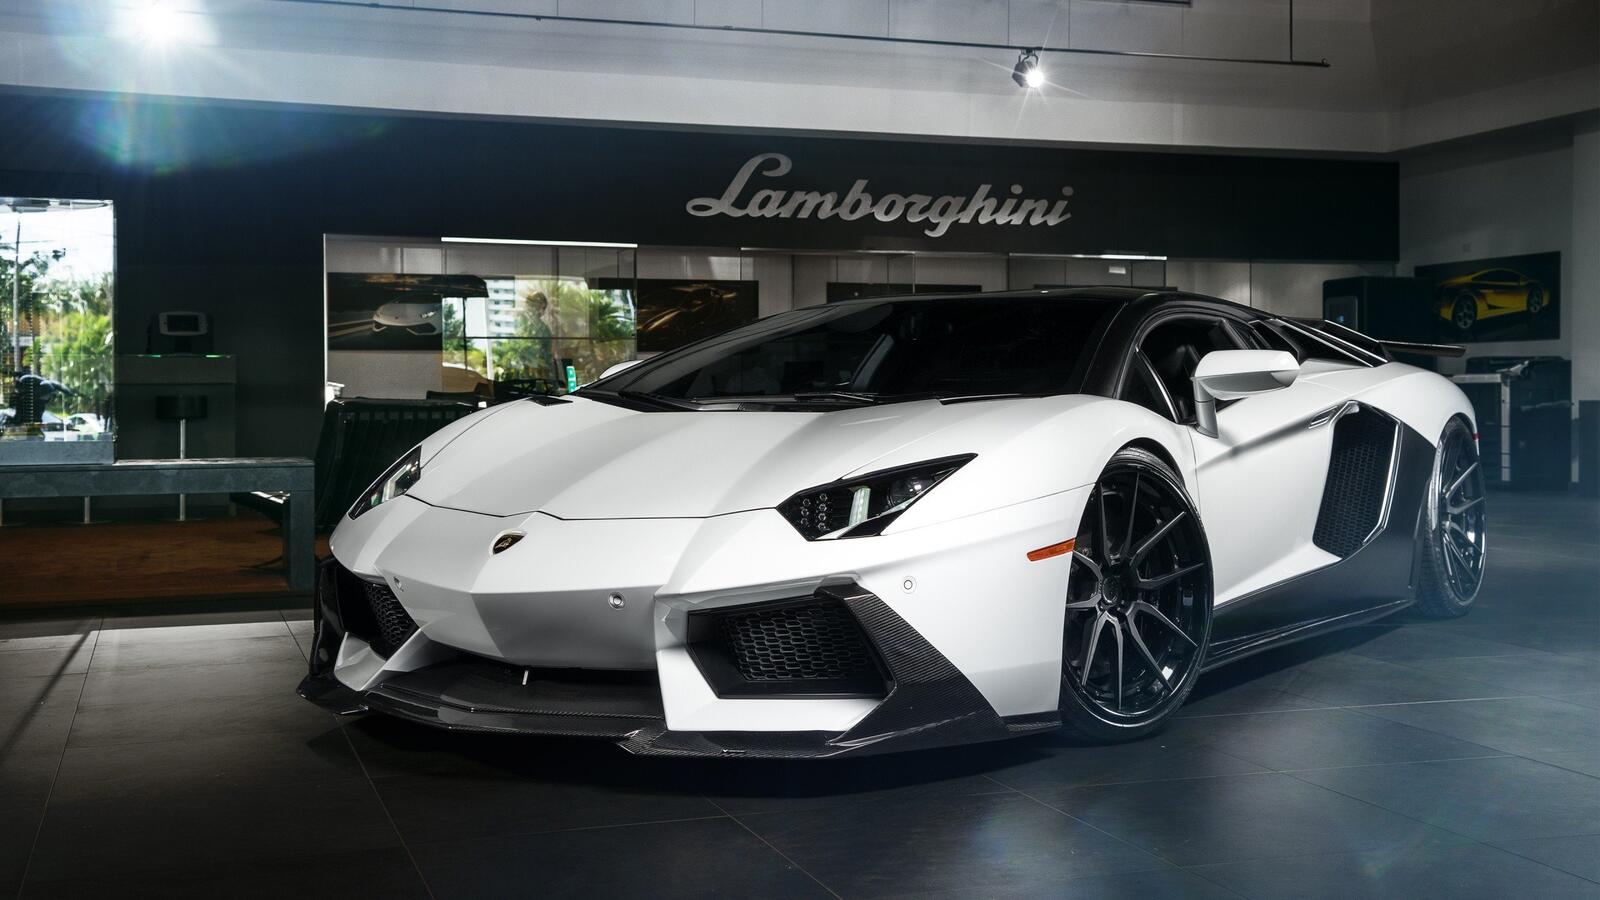 Wallpapers Lamborghini white car view from front on the desktop